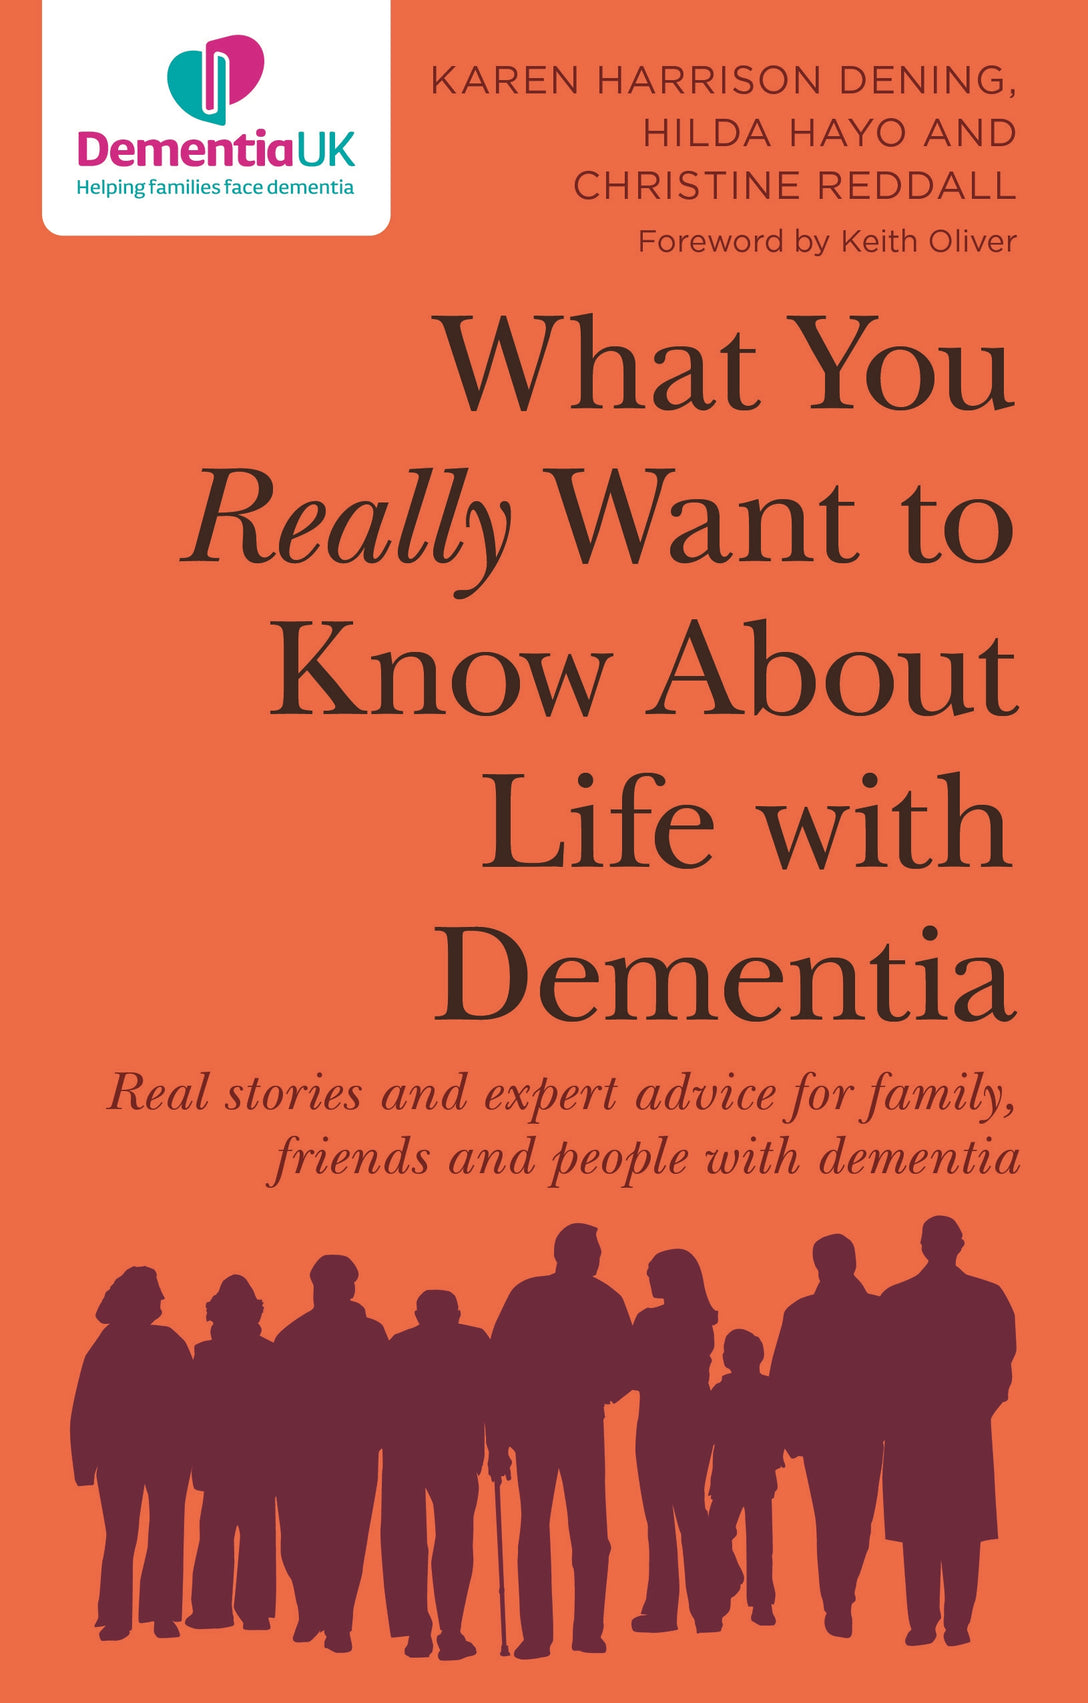 What You Really Want to Know About Life with Dementia by Keith Oliver, Karen Harrison Dening, Hilda Hayo, Christine Reddall